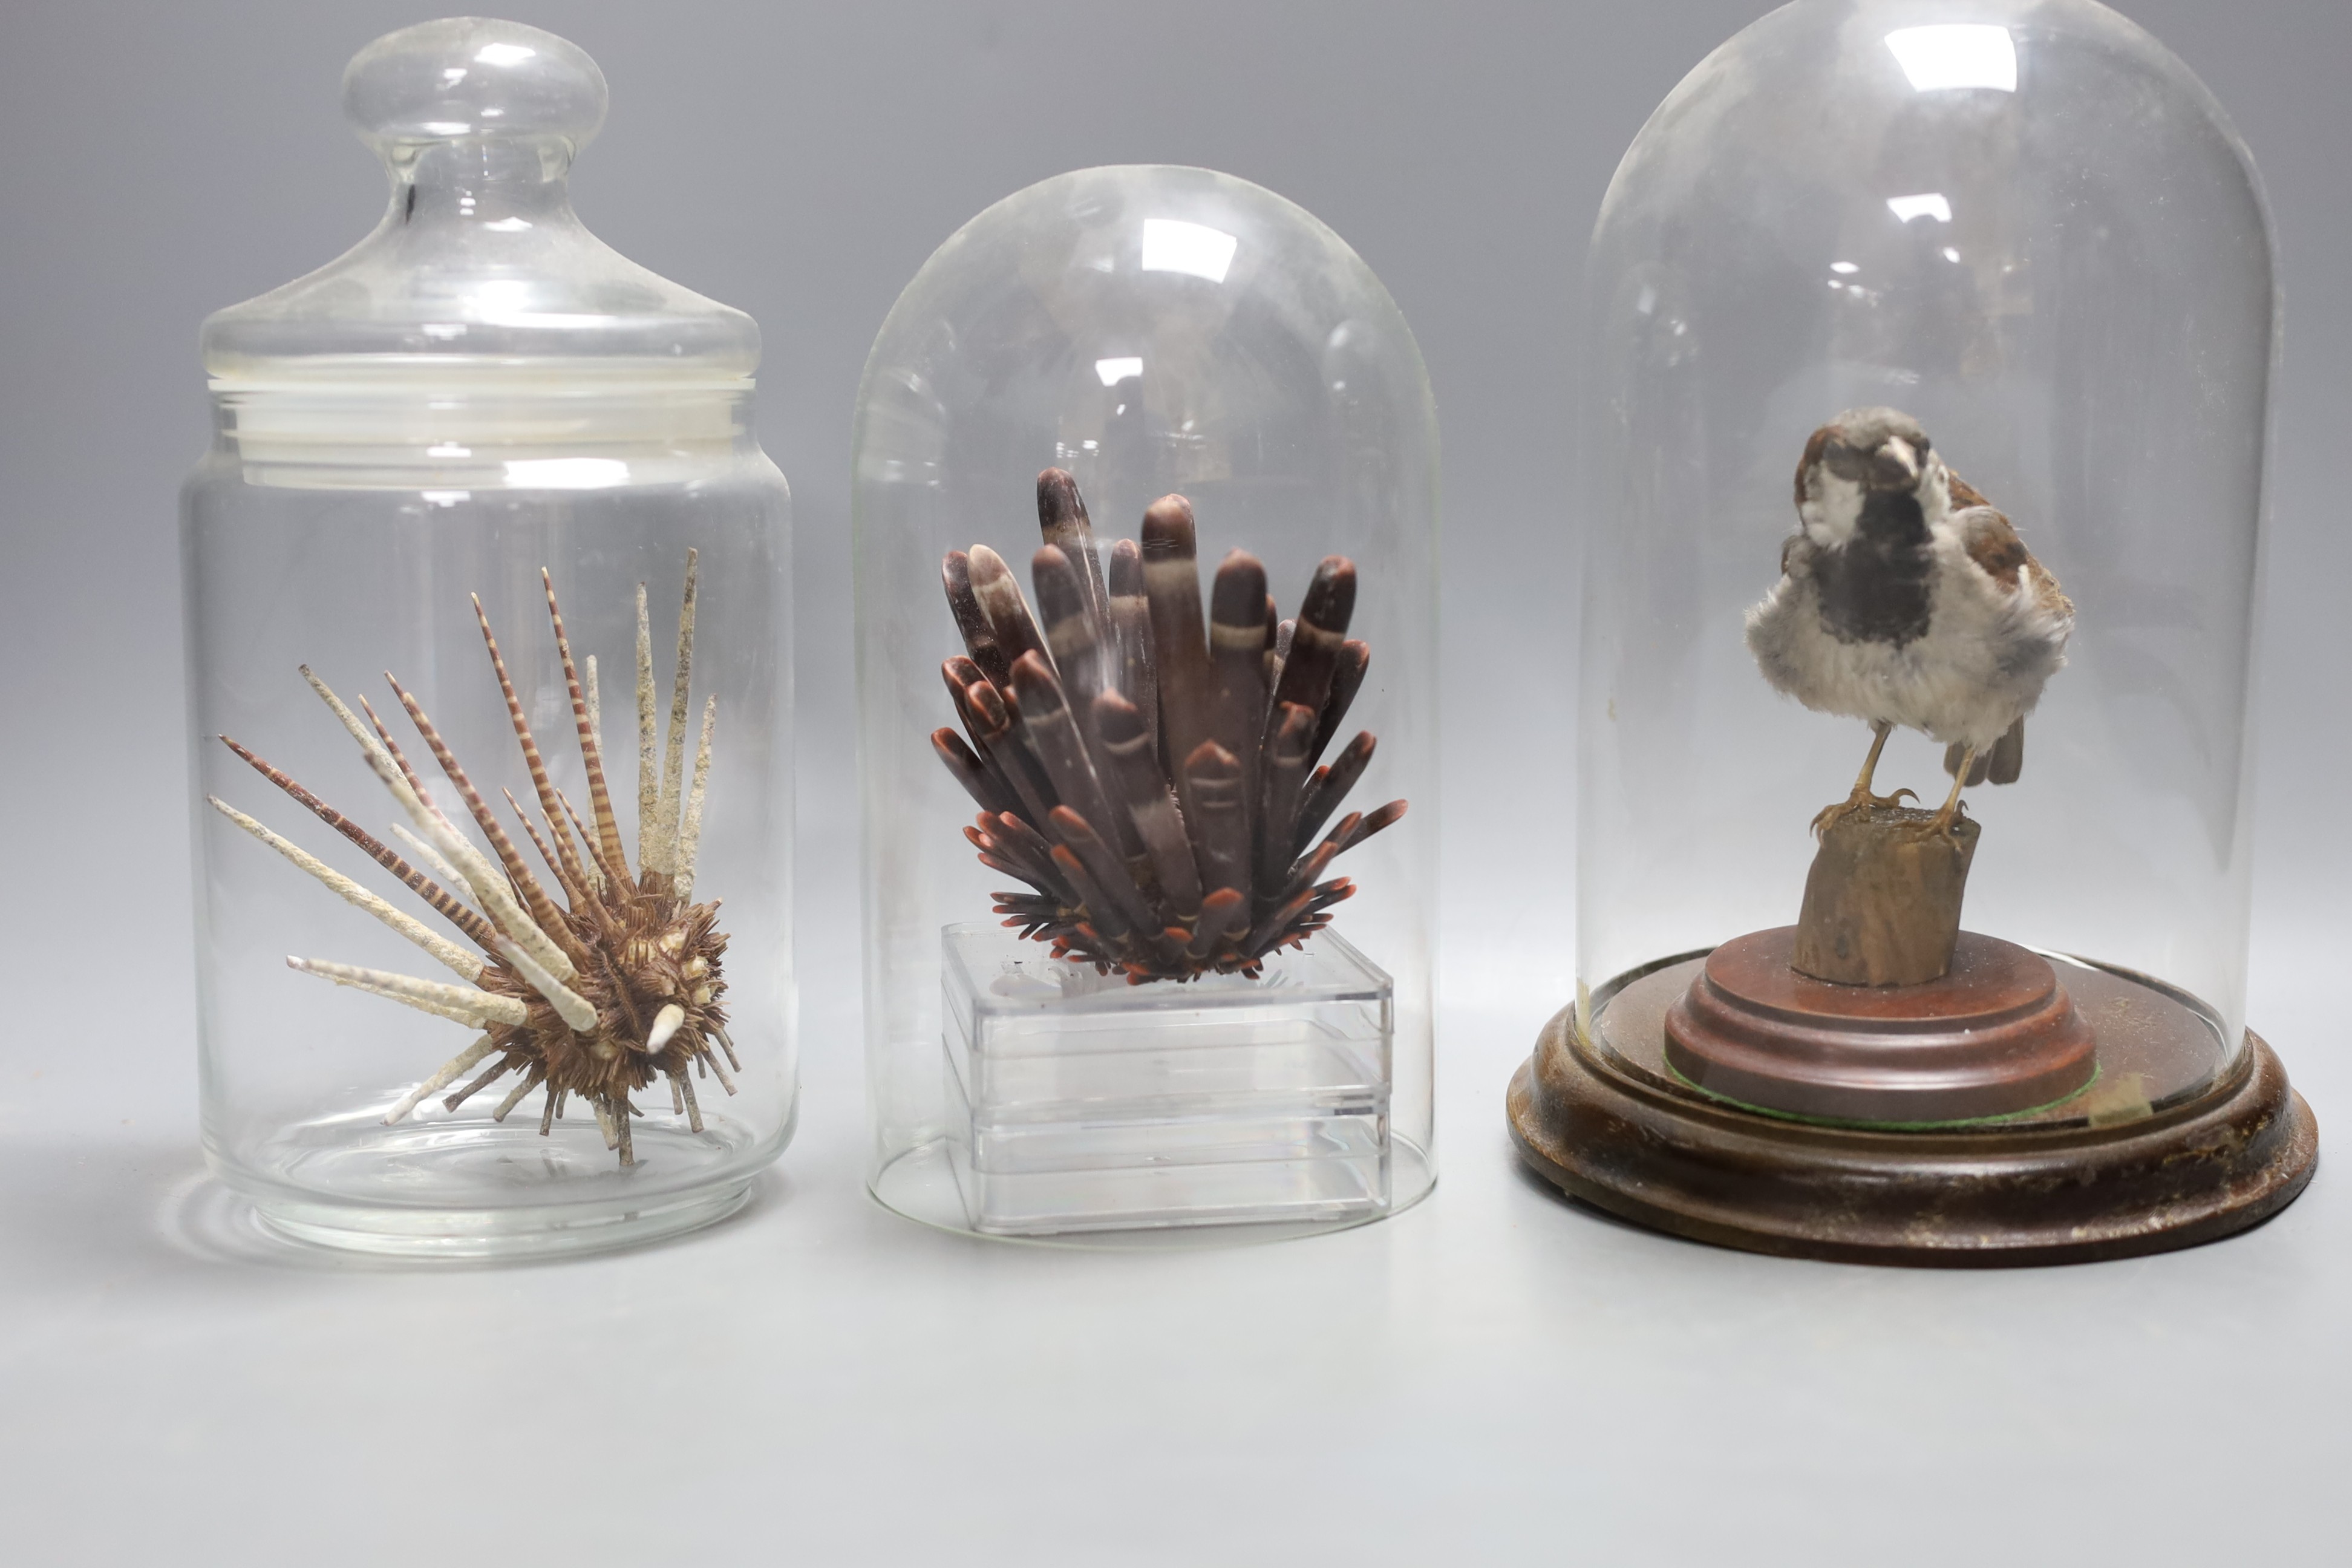 Two ostrich eggs, a taxidermy sparrow under a glass dome, 21 cm high, shell and urchin specimens